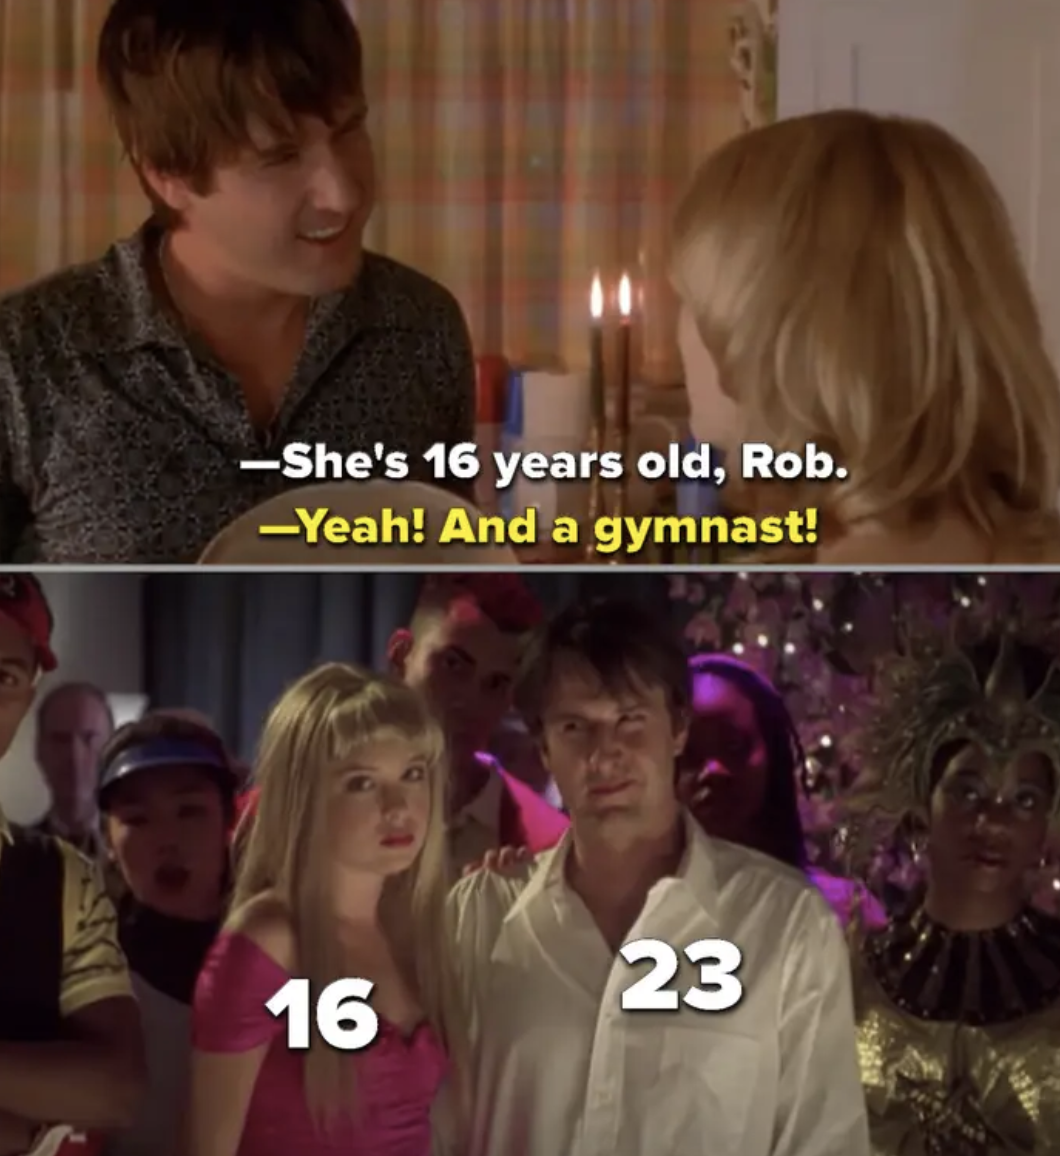 Rob being confronted that he&#x27;s 23 and dating a 16-year-old student, then shrugging it off